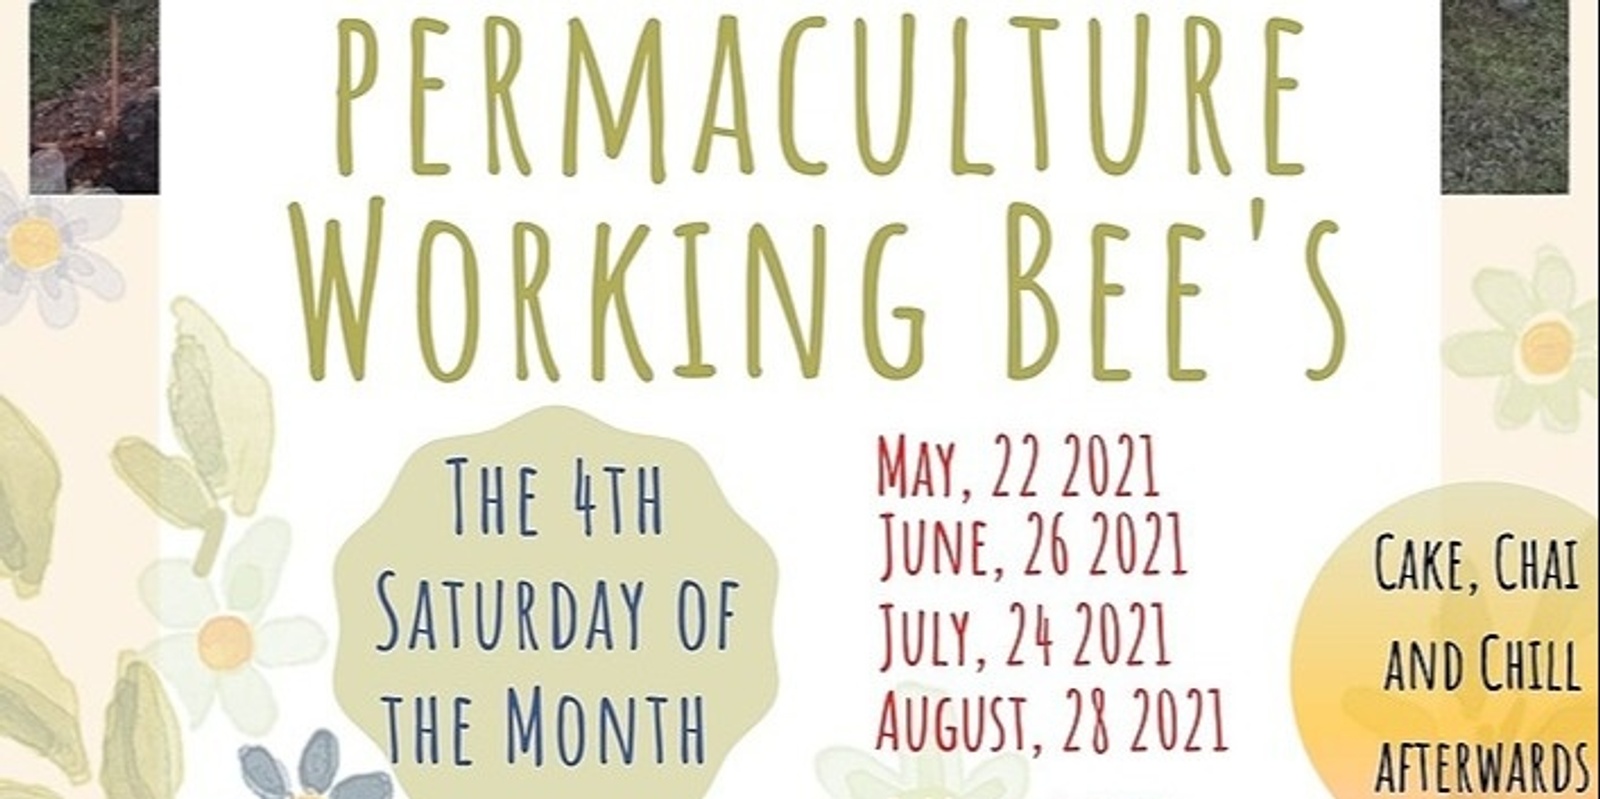 Banner image for Permaculture Working Bee